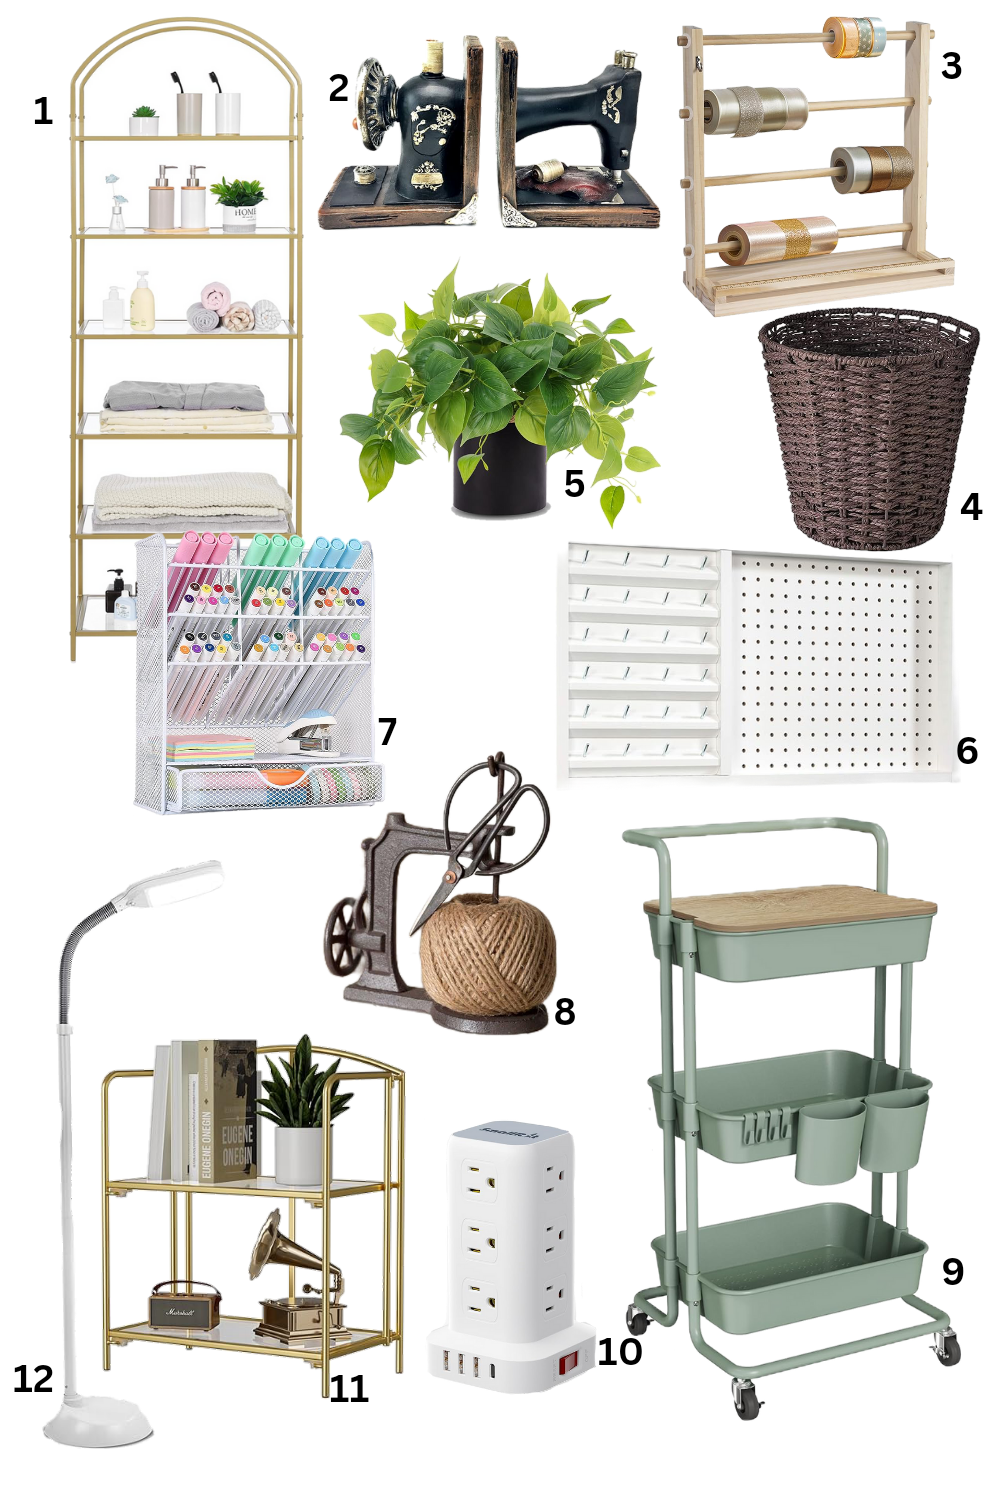 12 Useful Must-Have Items for Your Craft Room